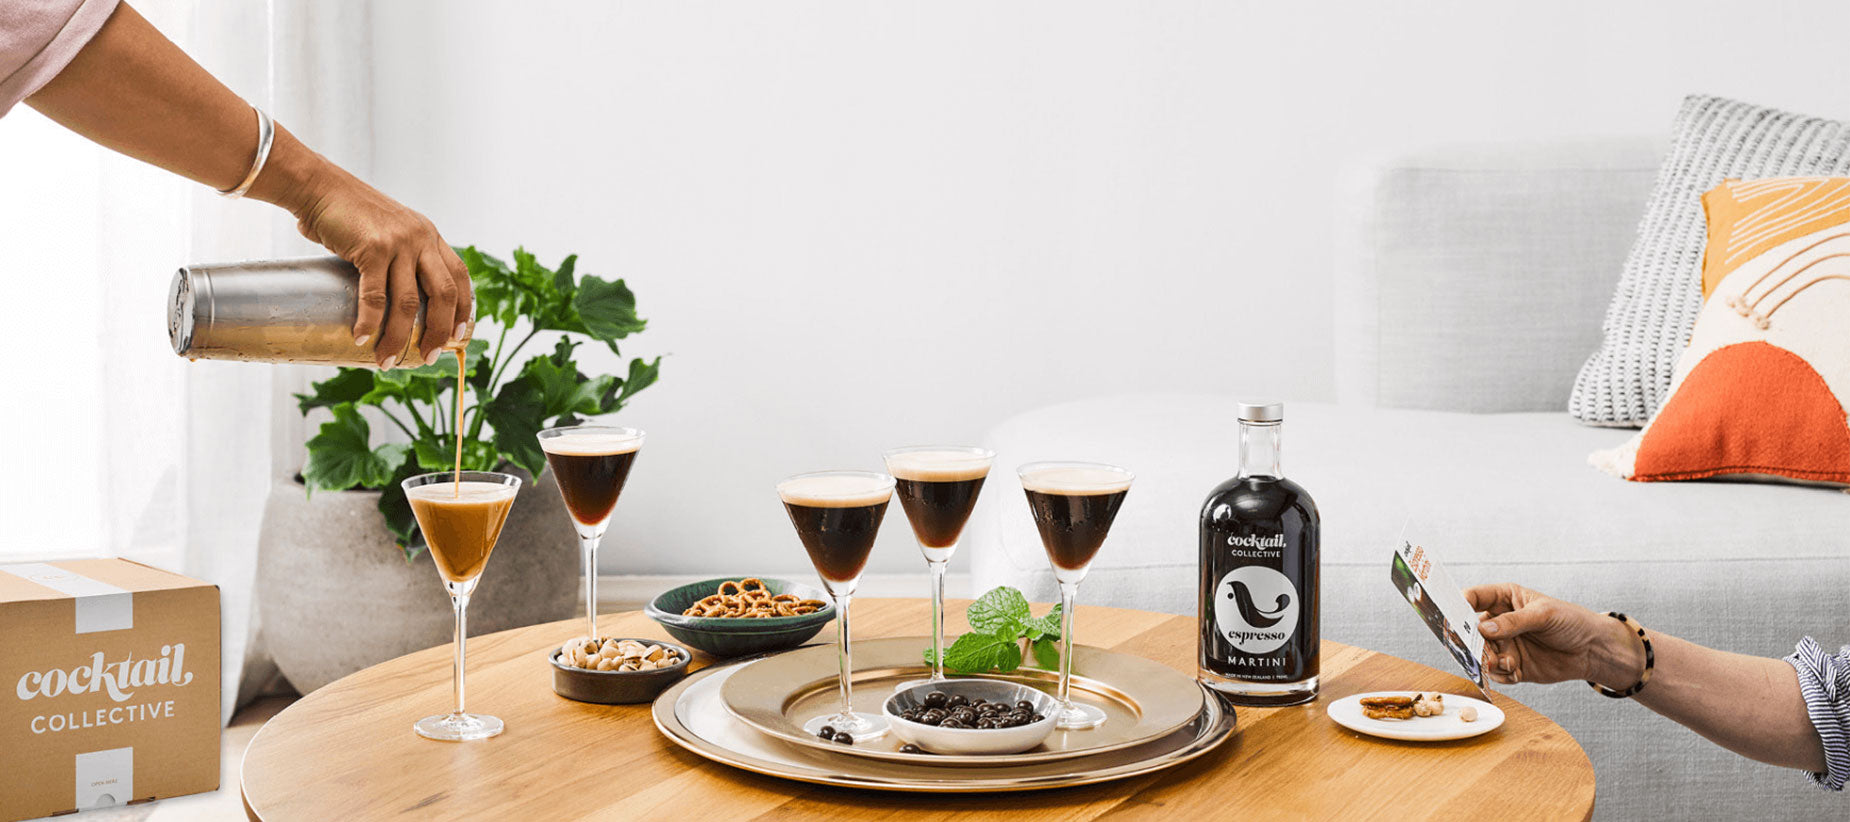 Espresso Martini cocktails being poured on table with nibbles